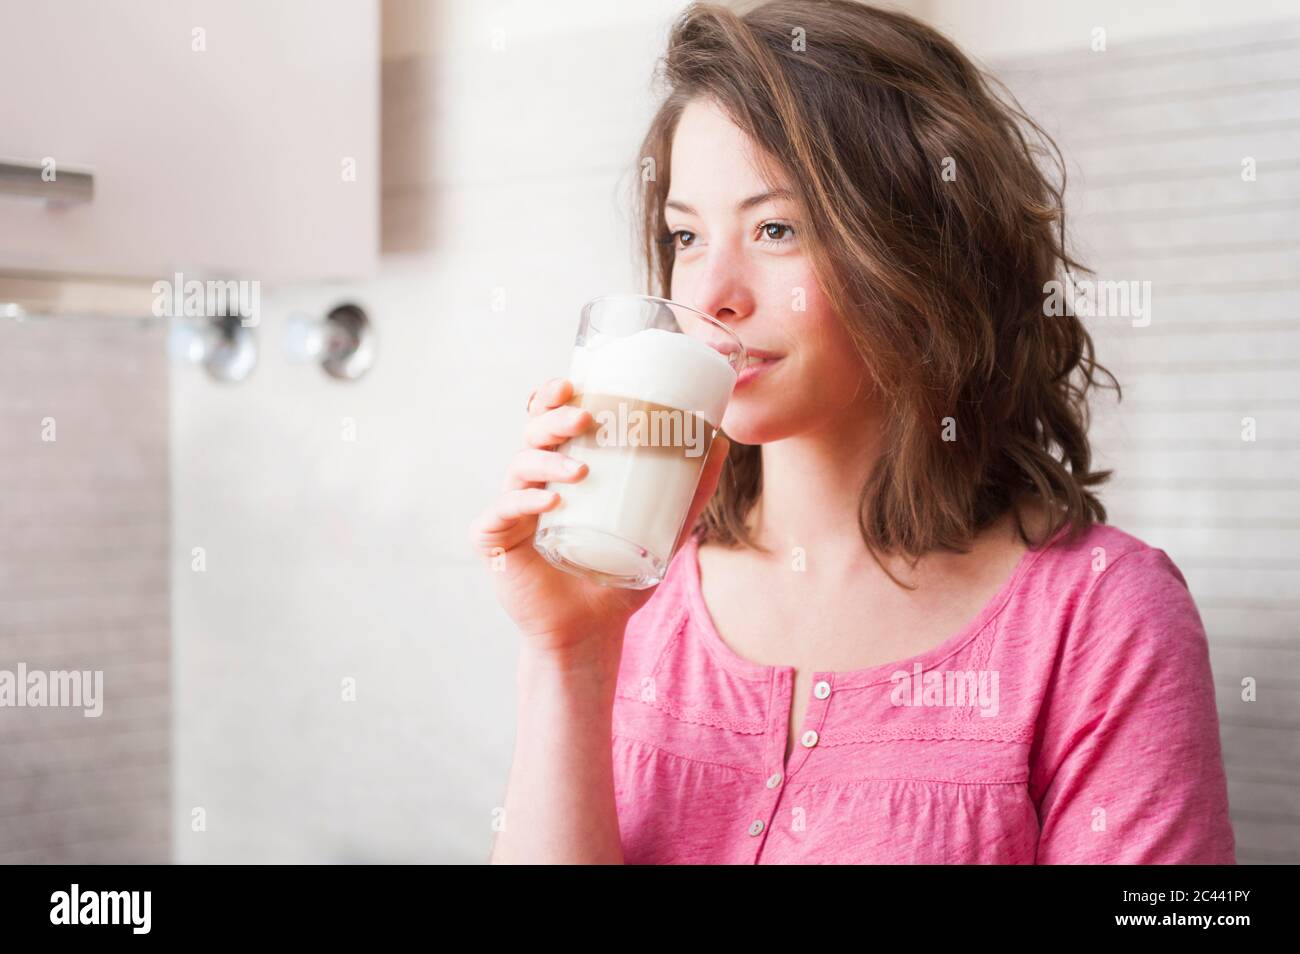 Thoughtful woman drinking Dalgona coffee while standing in kitchen at home Stock Photo